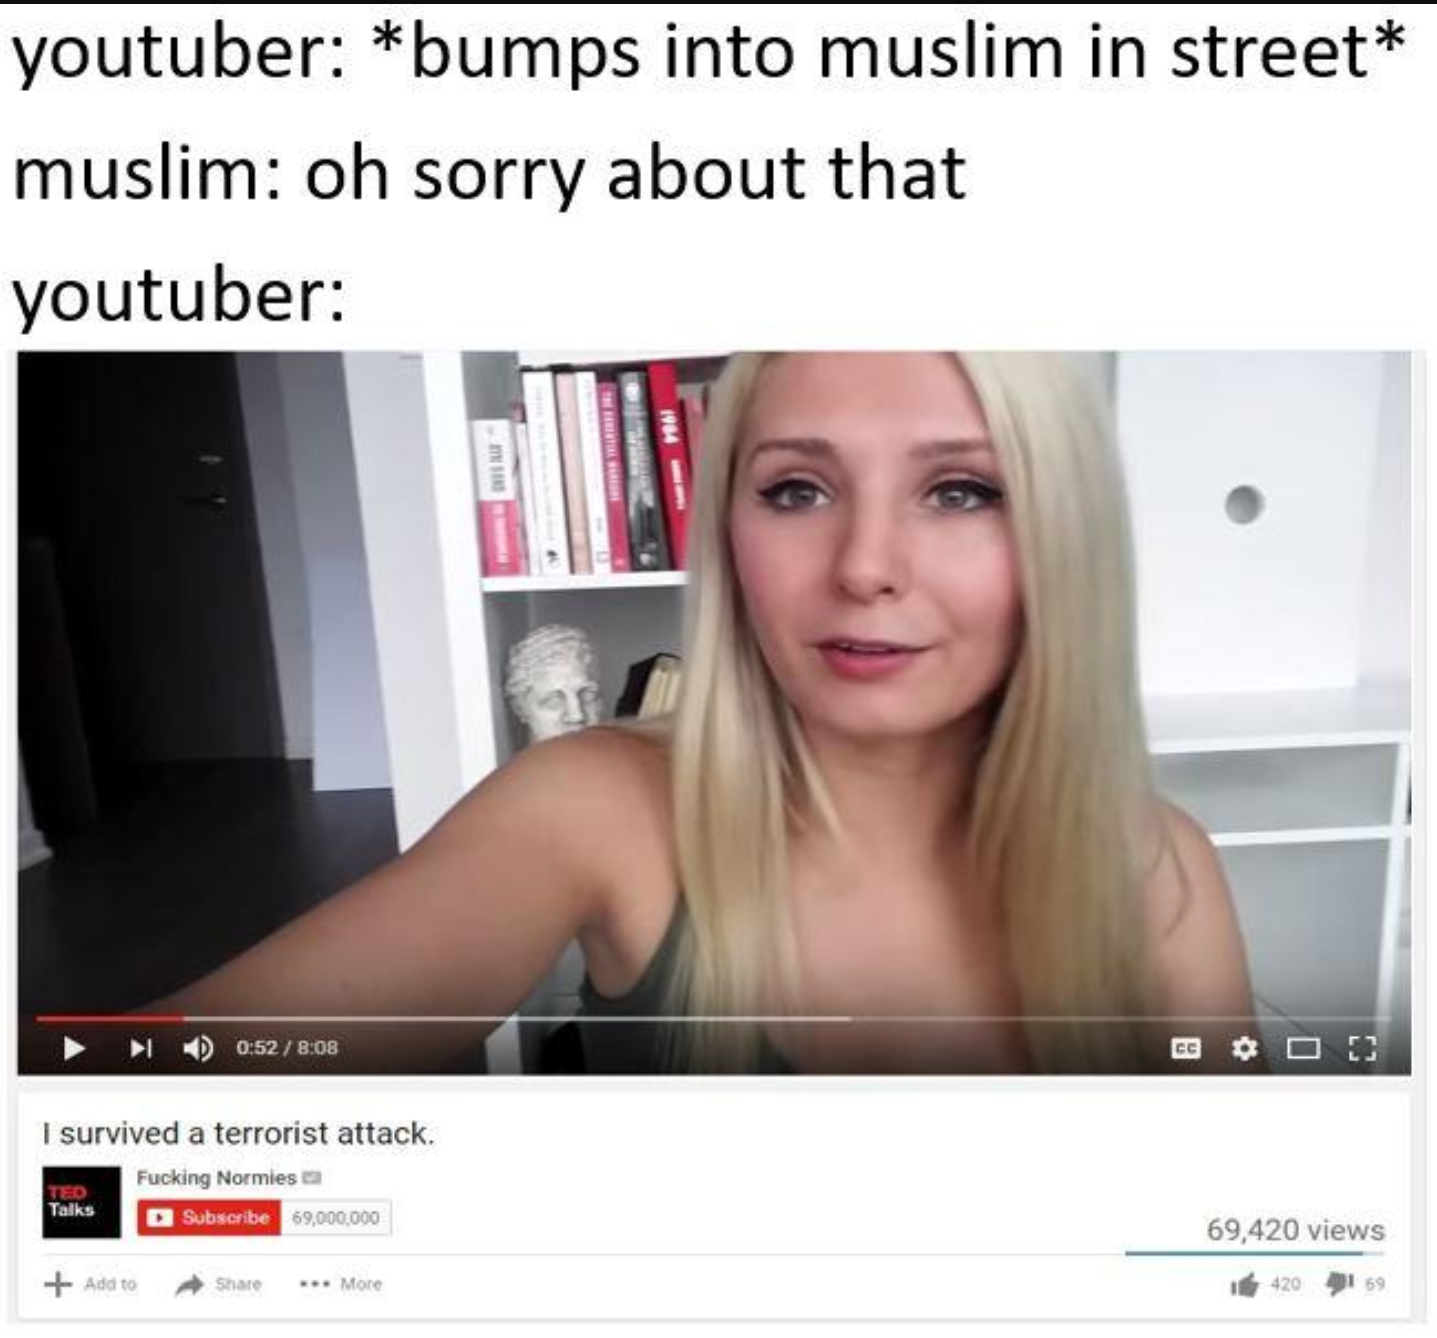 Meme of youtuber who bumps into muslim in the street, then claims they survived a terrorist attack on youtube